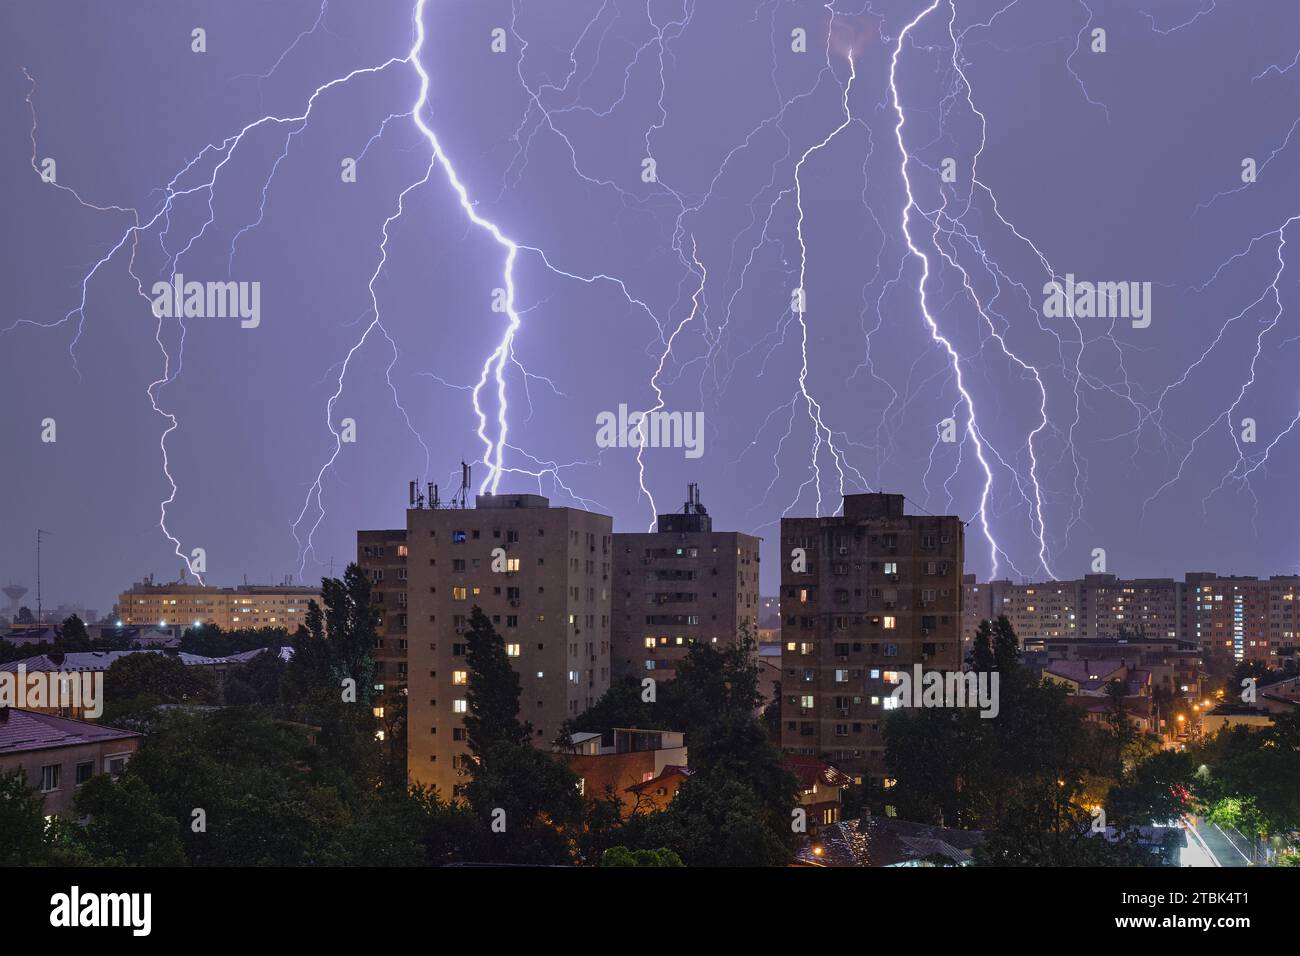 Multiple lightning strikes and thunderstorm over city buildings, at night. Weather phenomena. Stock Photo